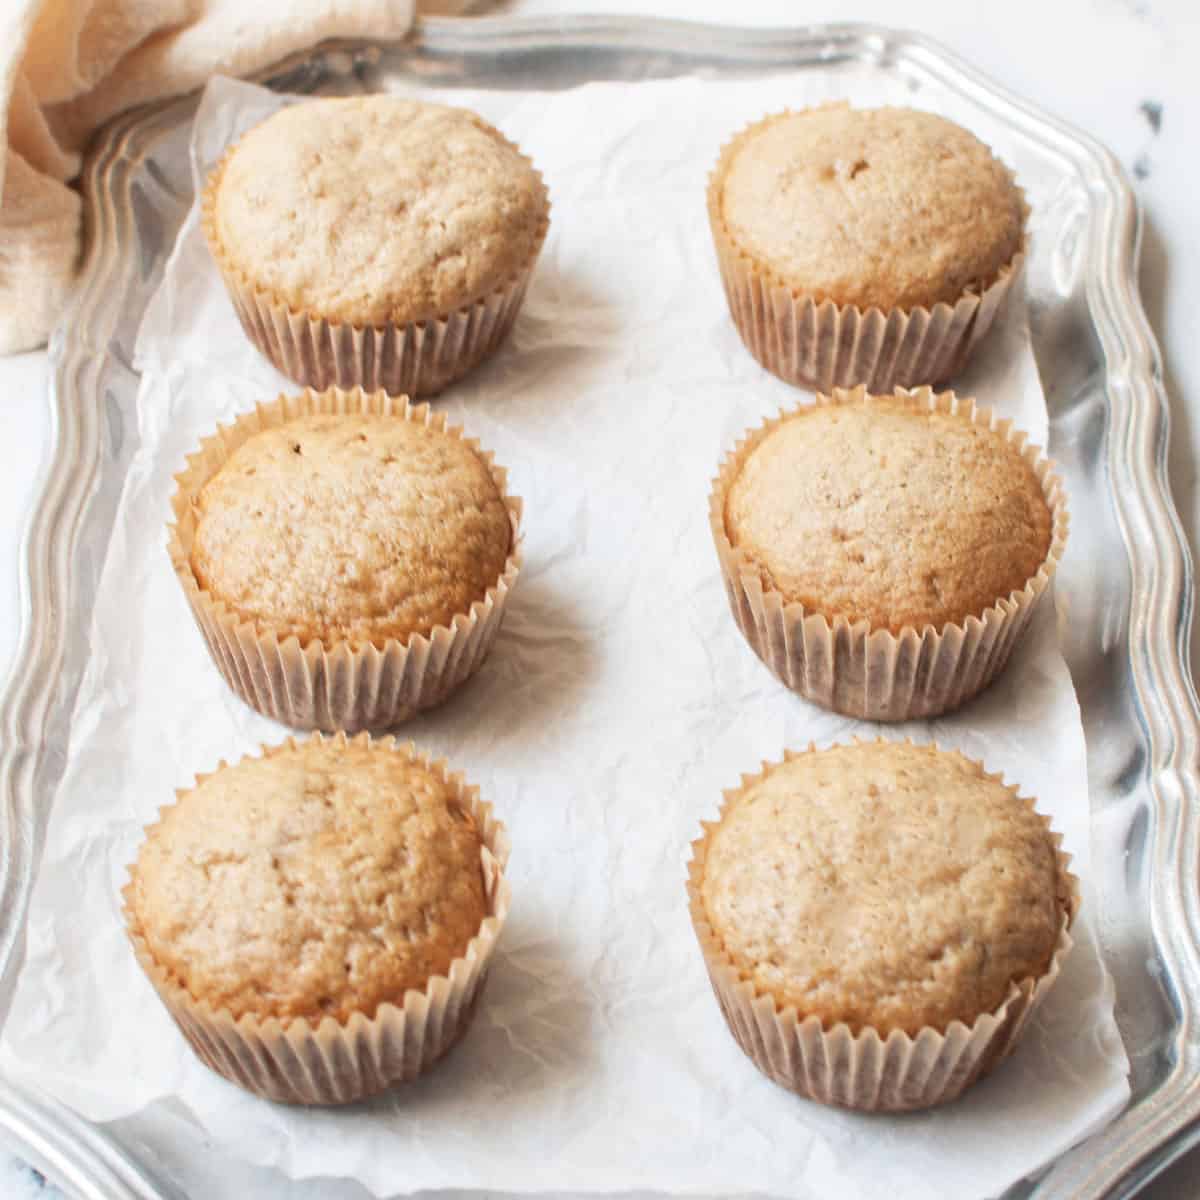 Banana muffins on a silver tray.